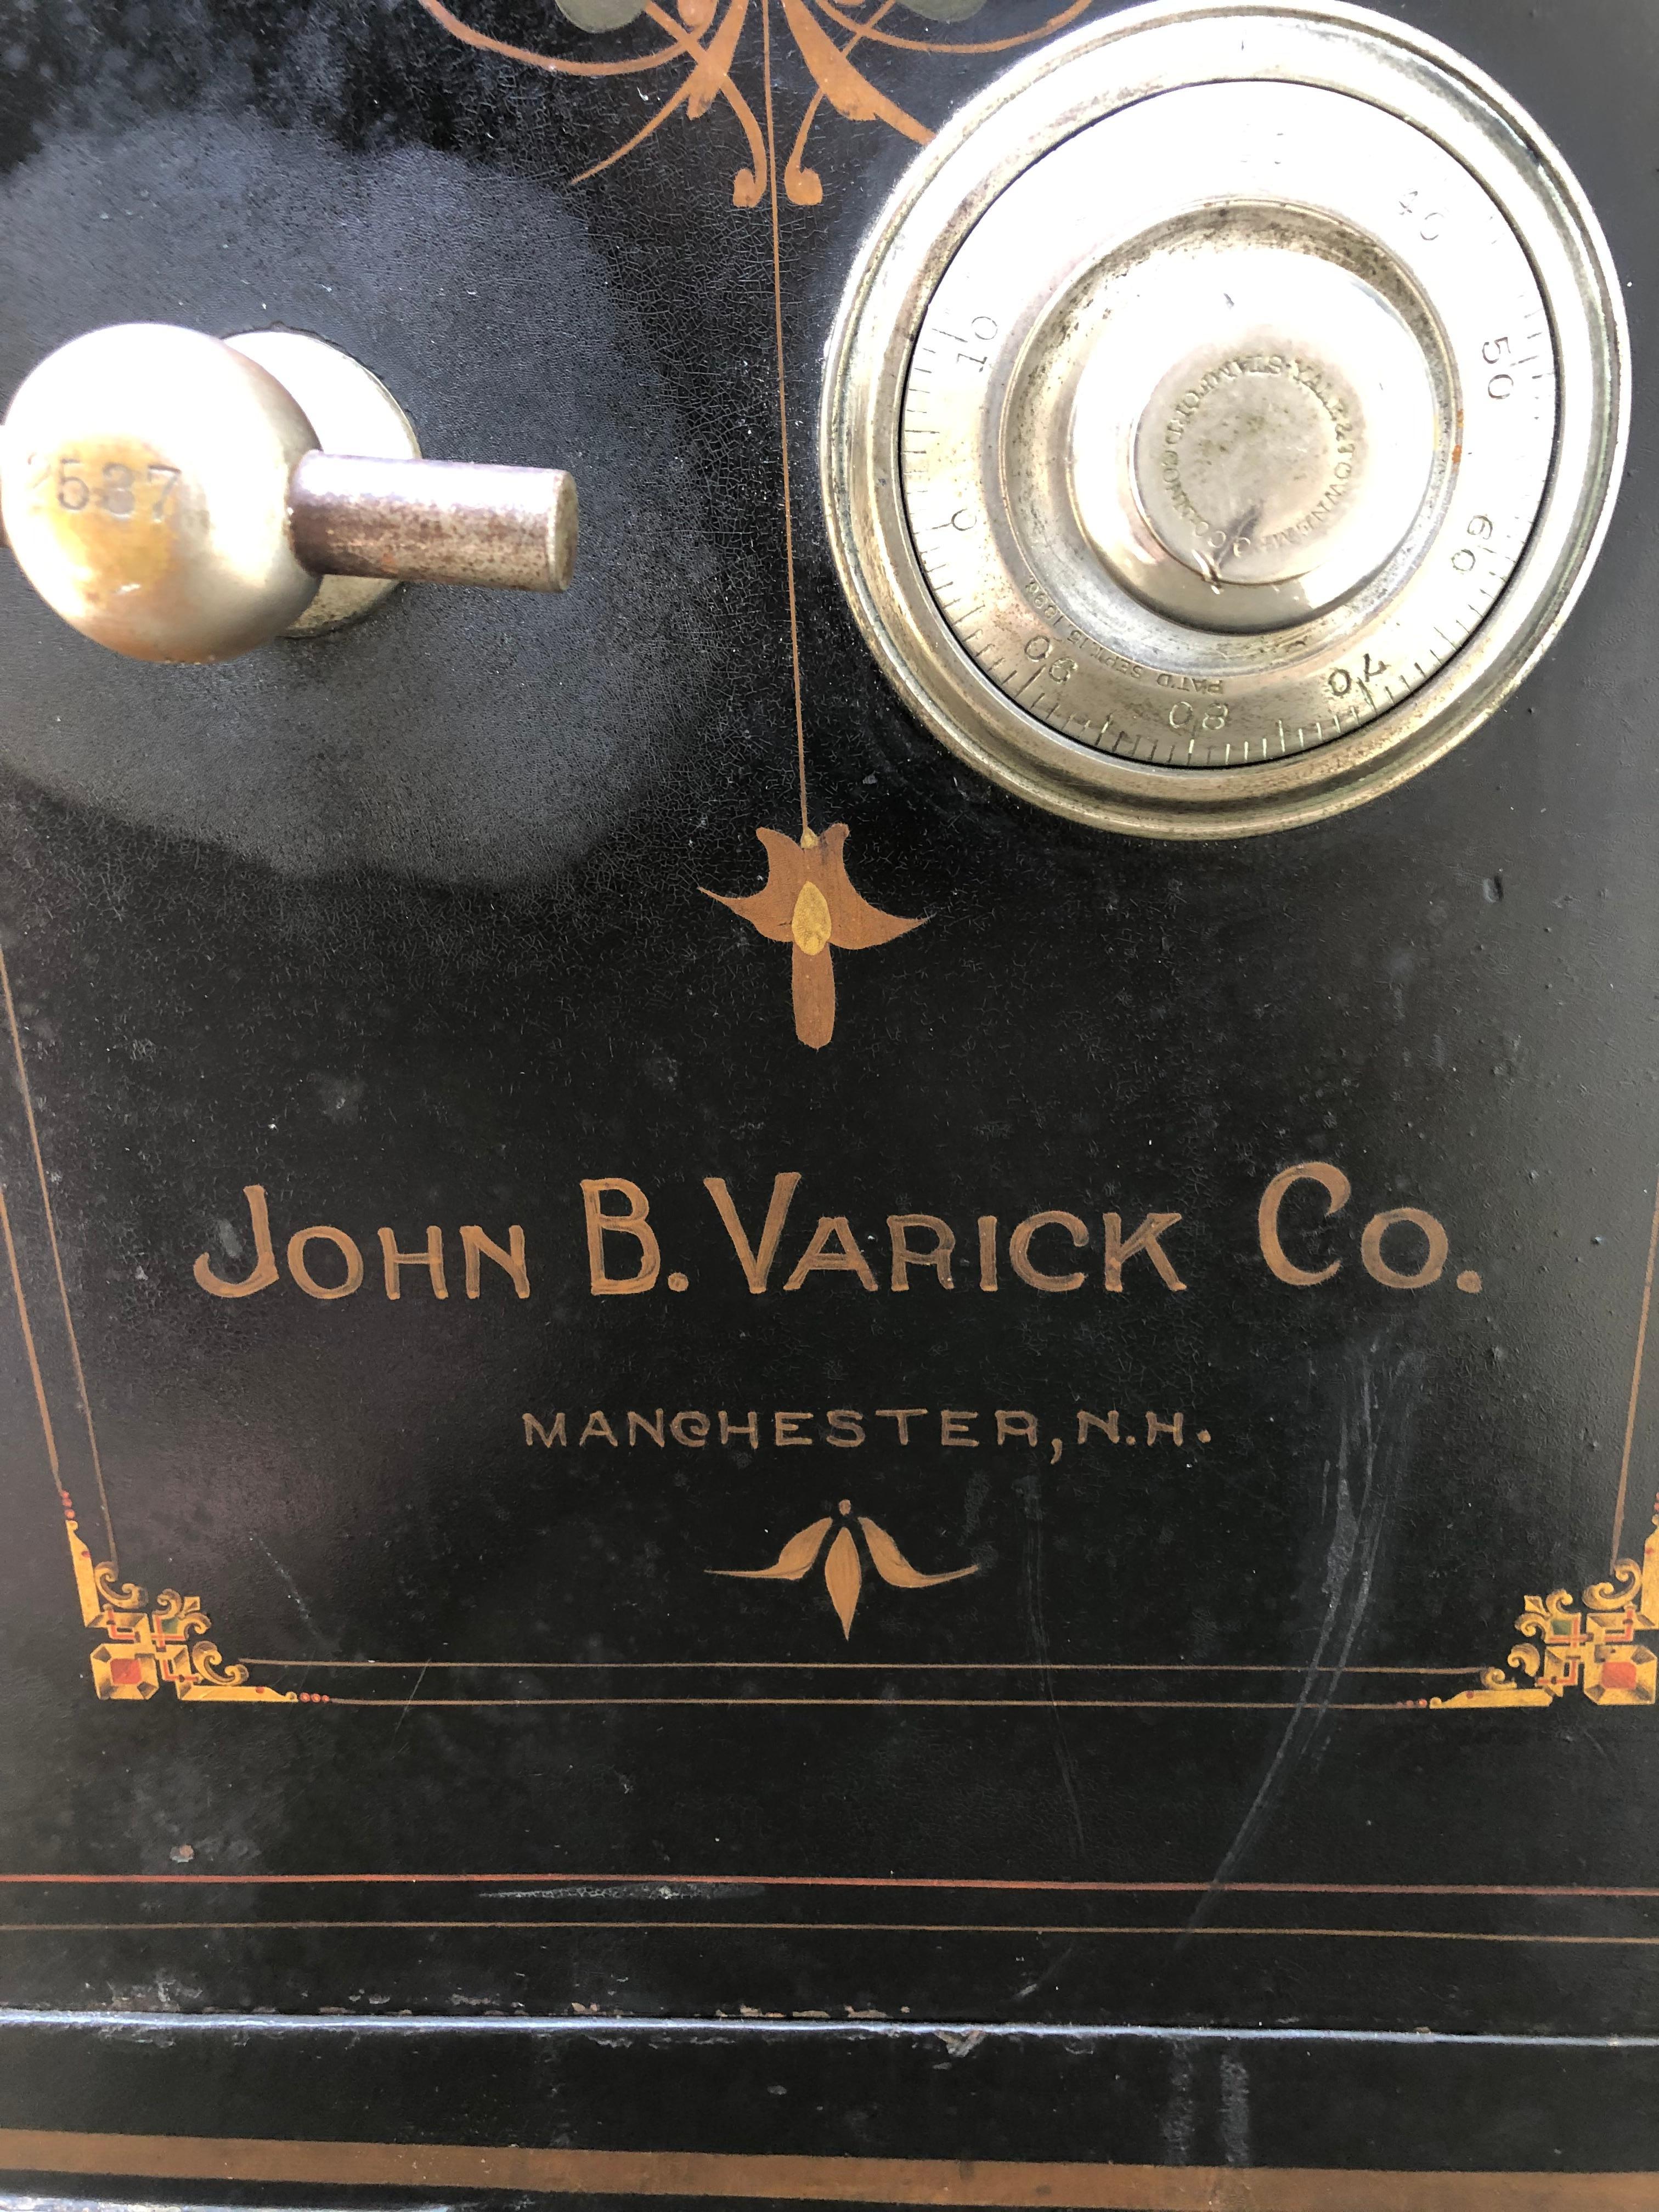 A great looking vintage black cast iron safe having wonderful gold decoration, a lovely landscape painting, silver hardware, chunky iron casters, and the classic name John B Varick Co. The interior has compartments including a small locking section